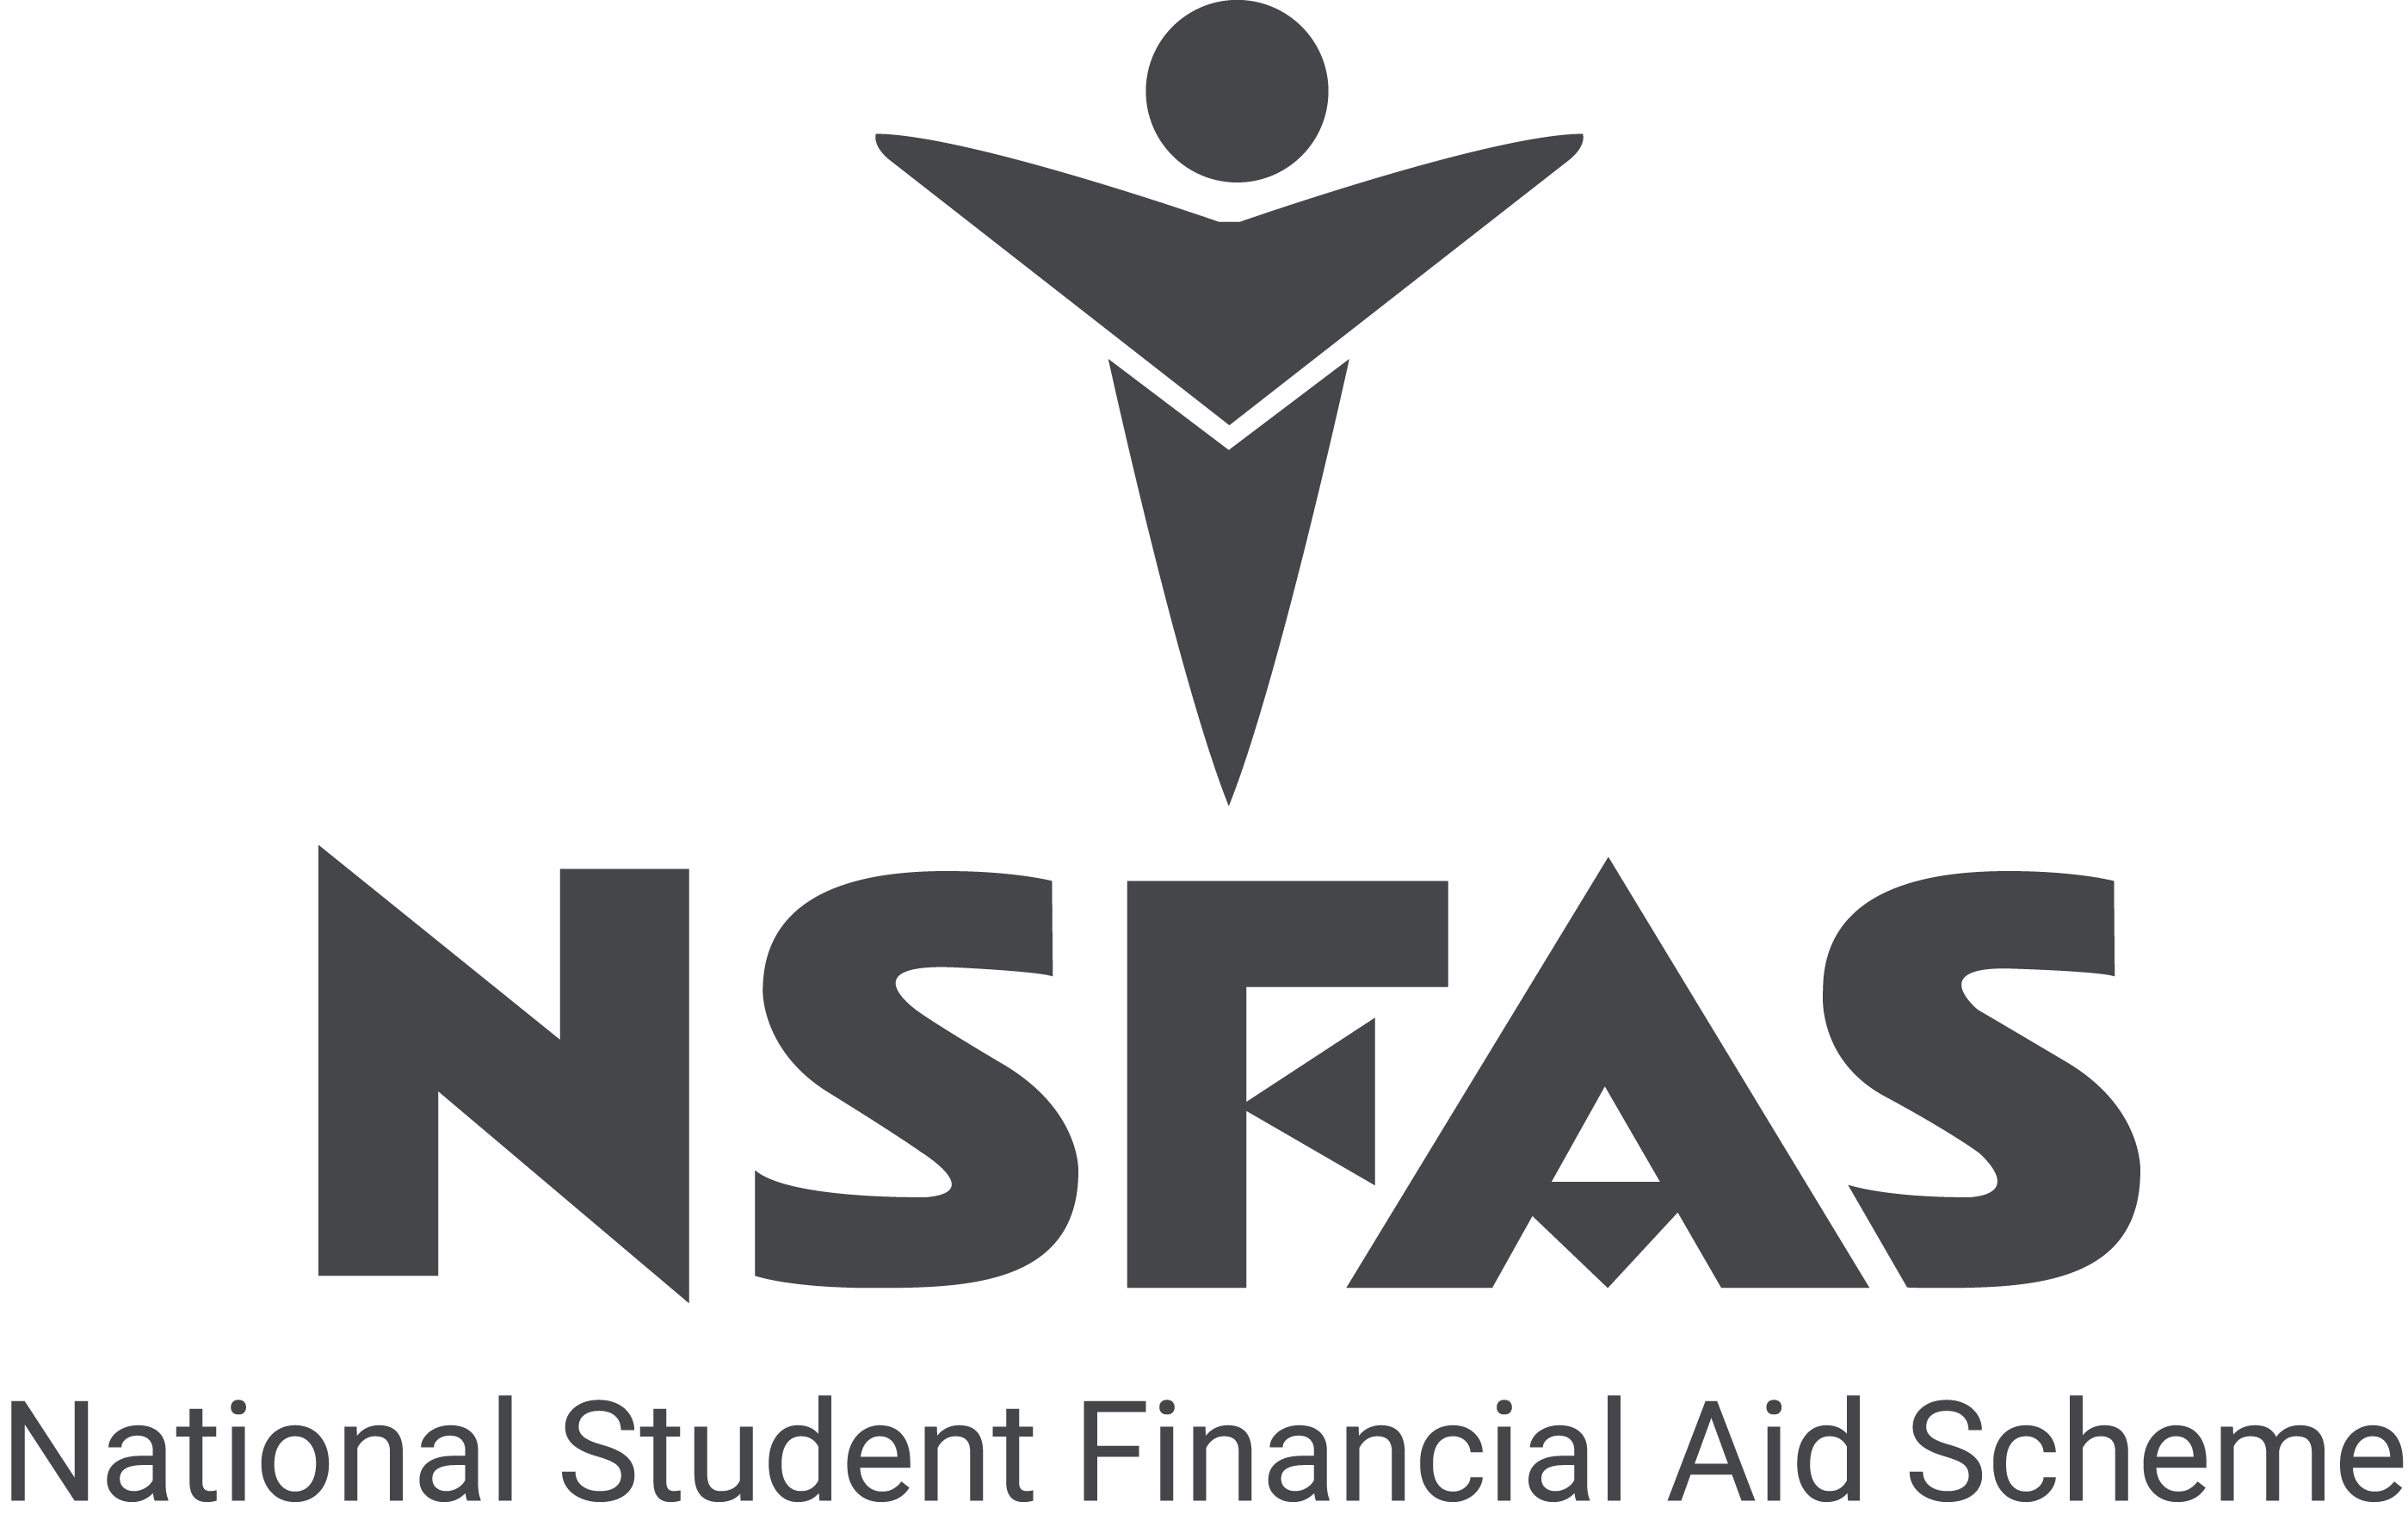 How to apply for NSFAS online